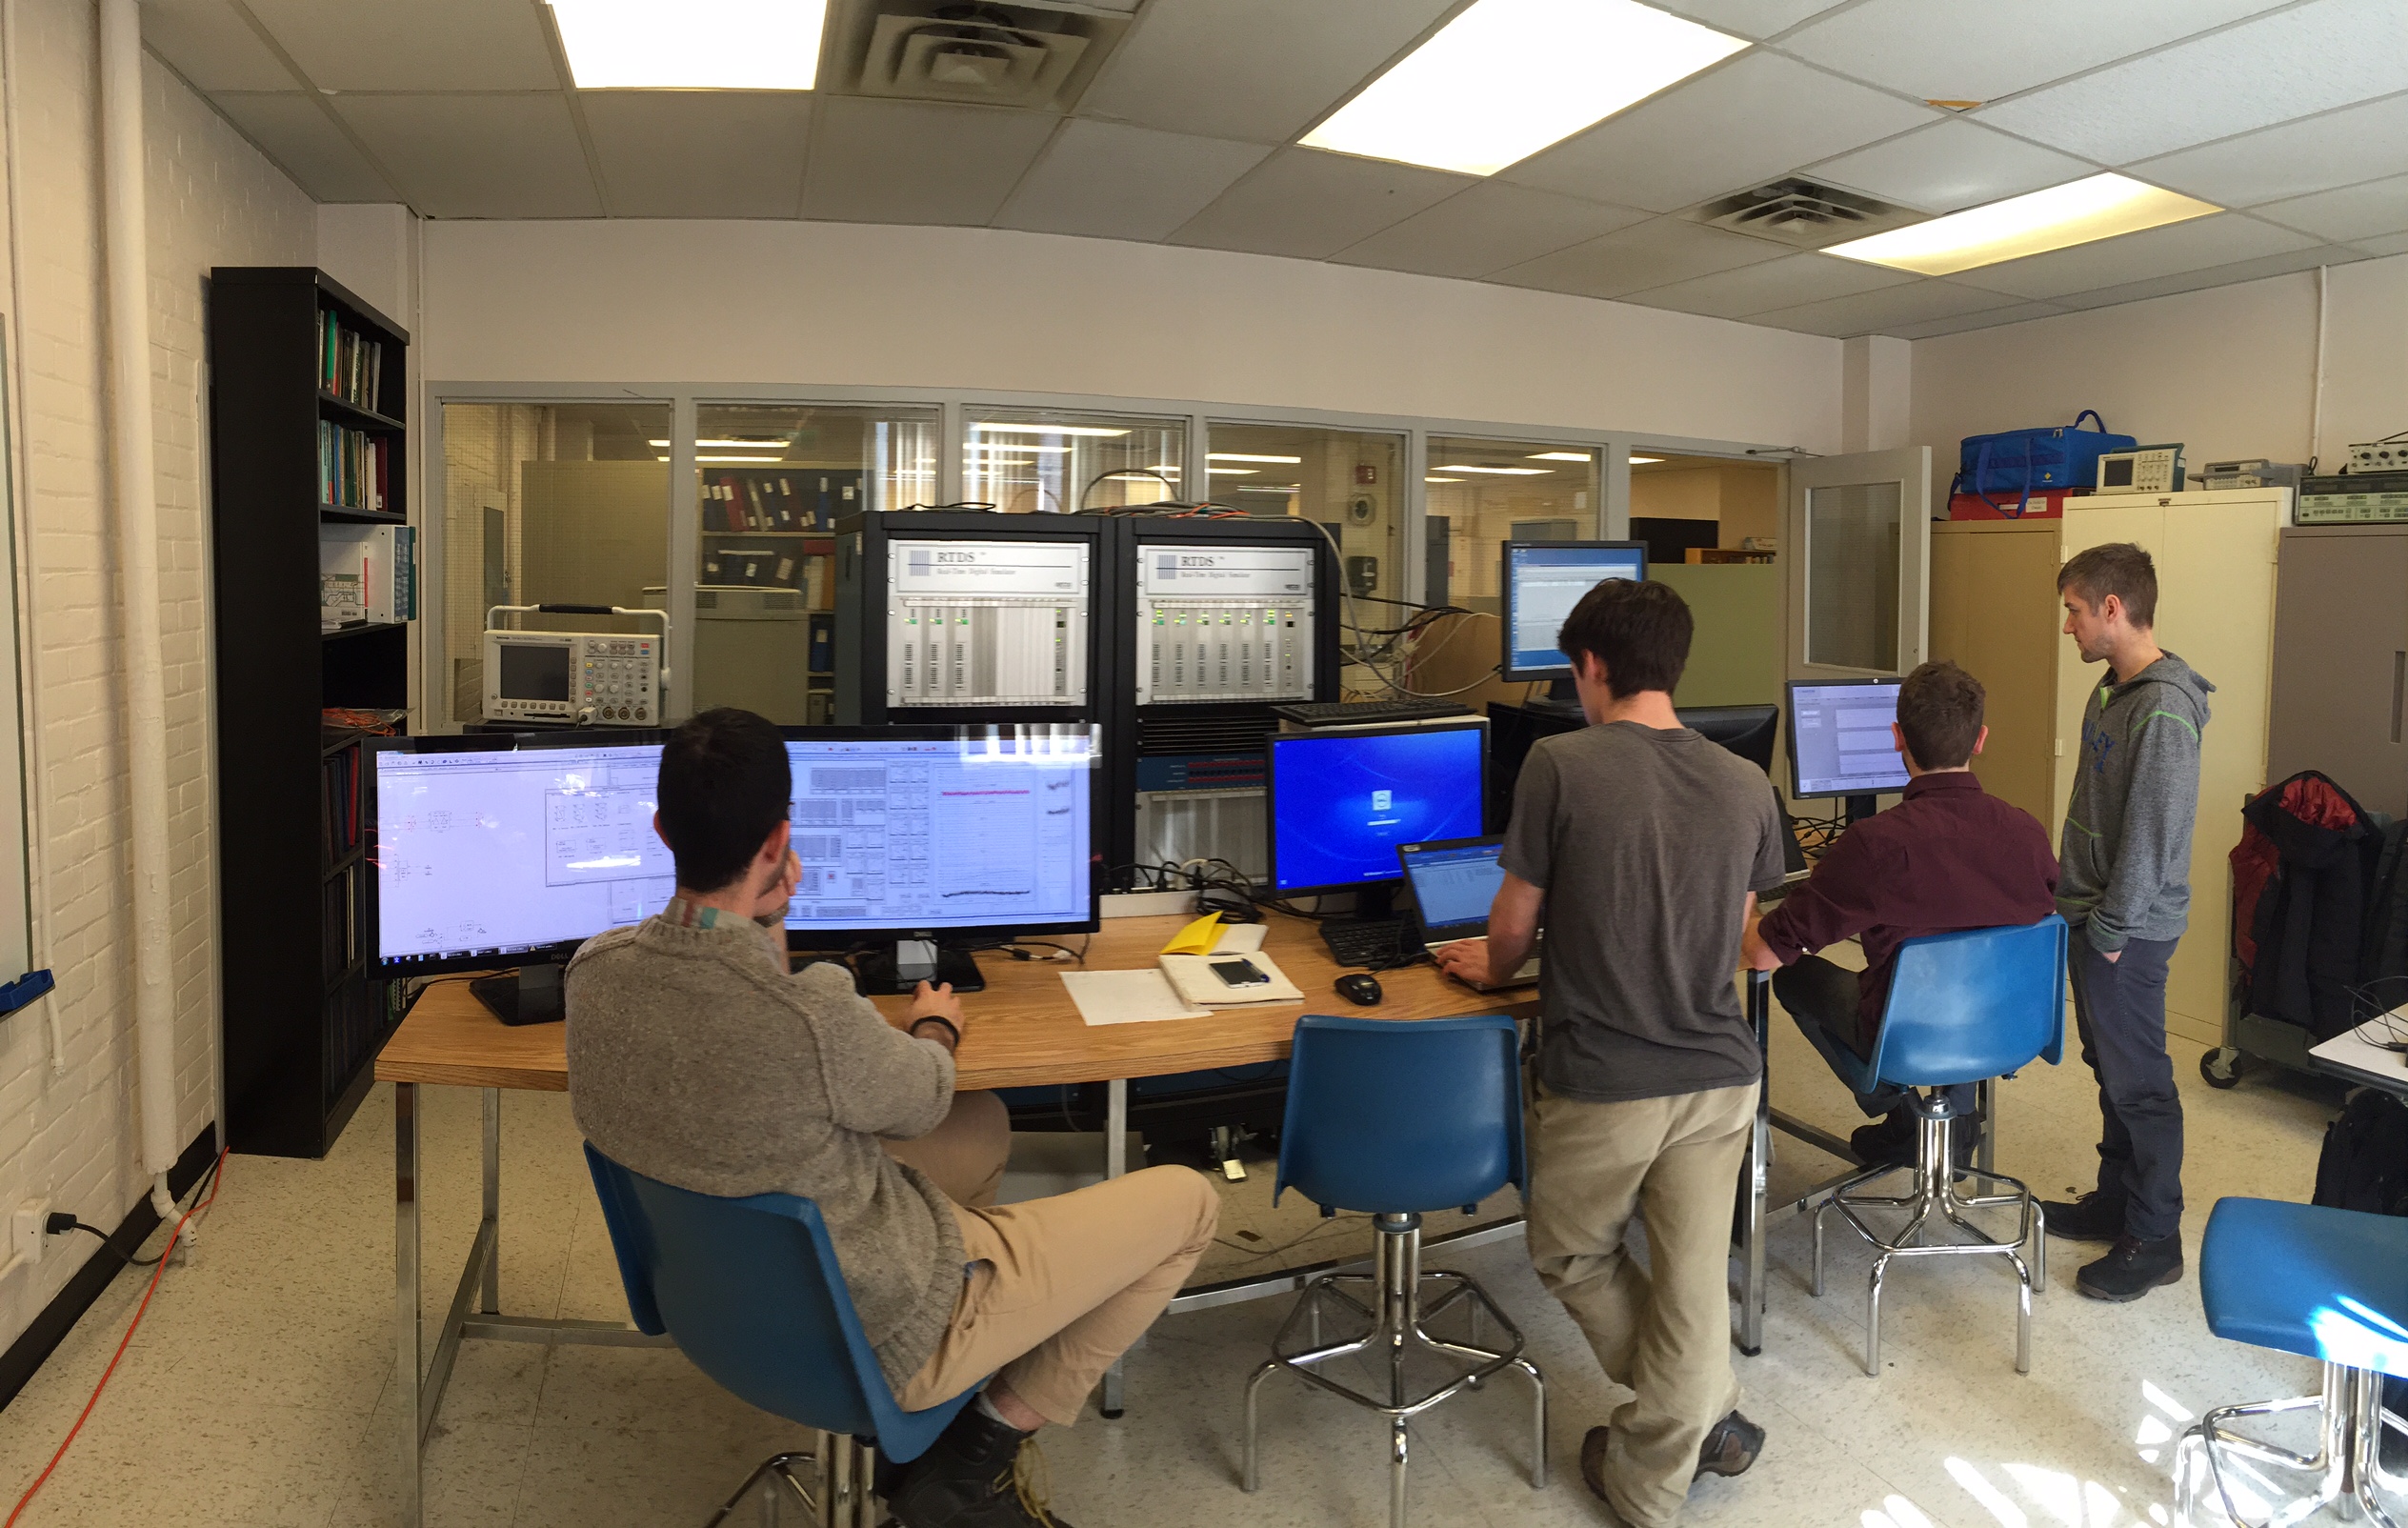 Test facility environment with 4 engineers from Hatch working at computer terminals connected to real time simulator and microgrid controls hardware